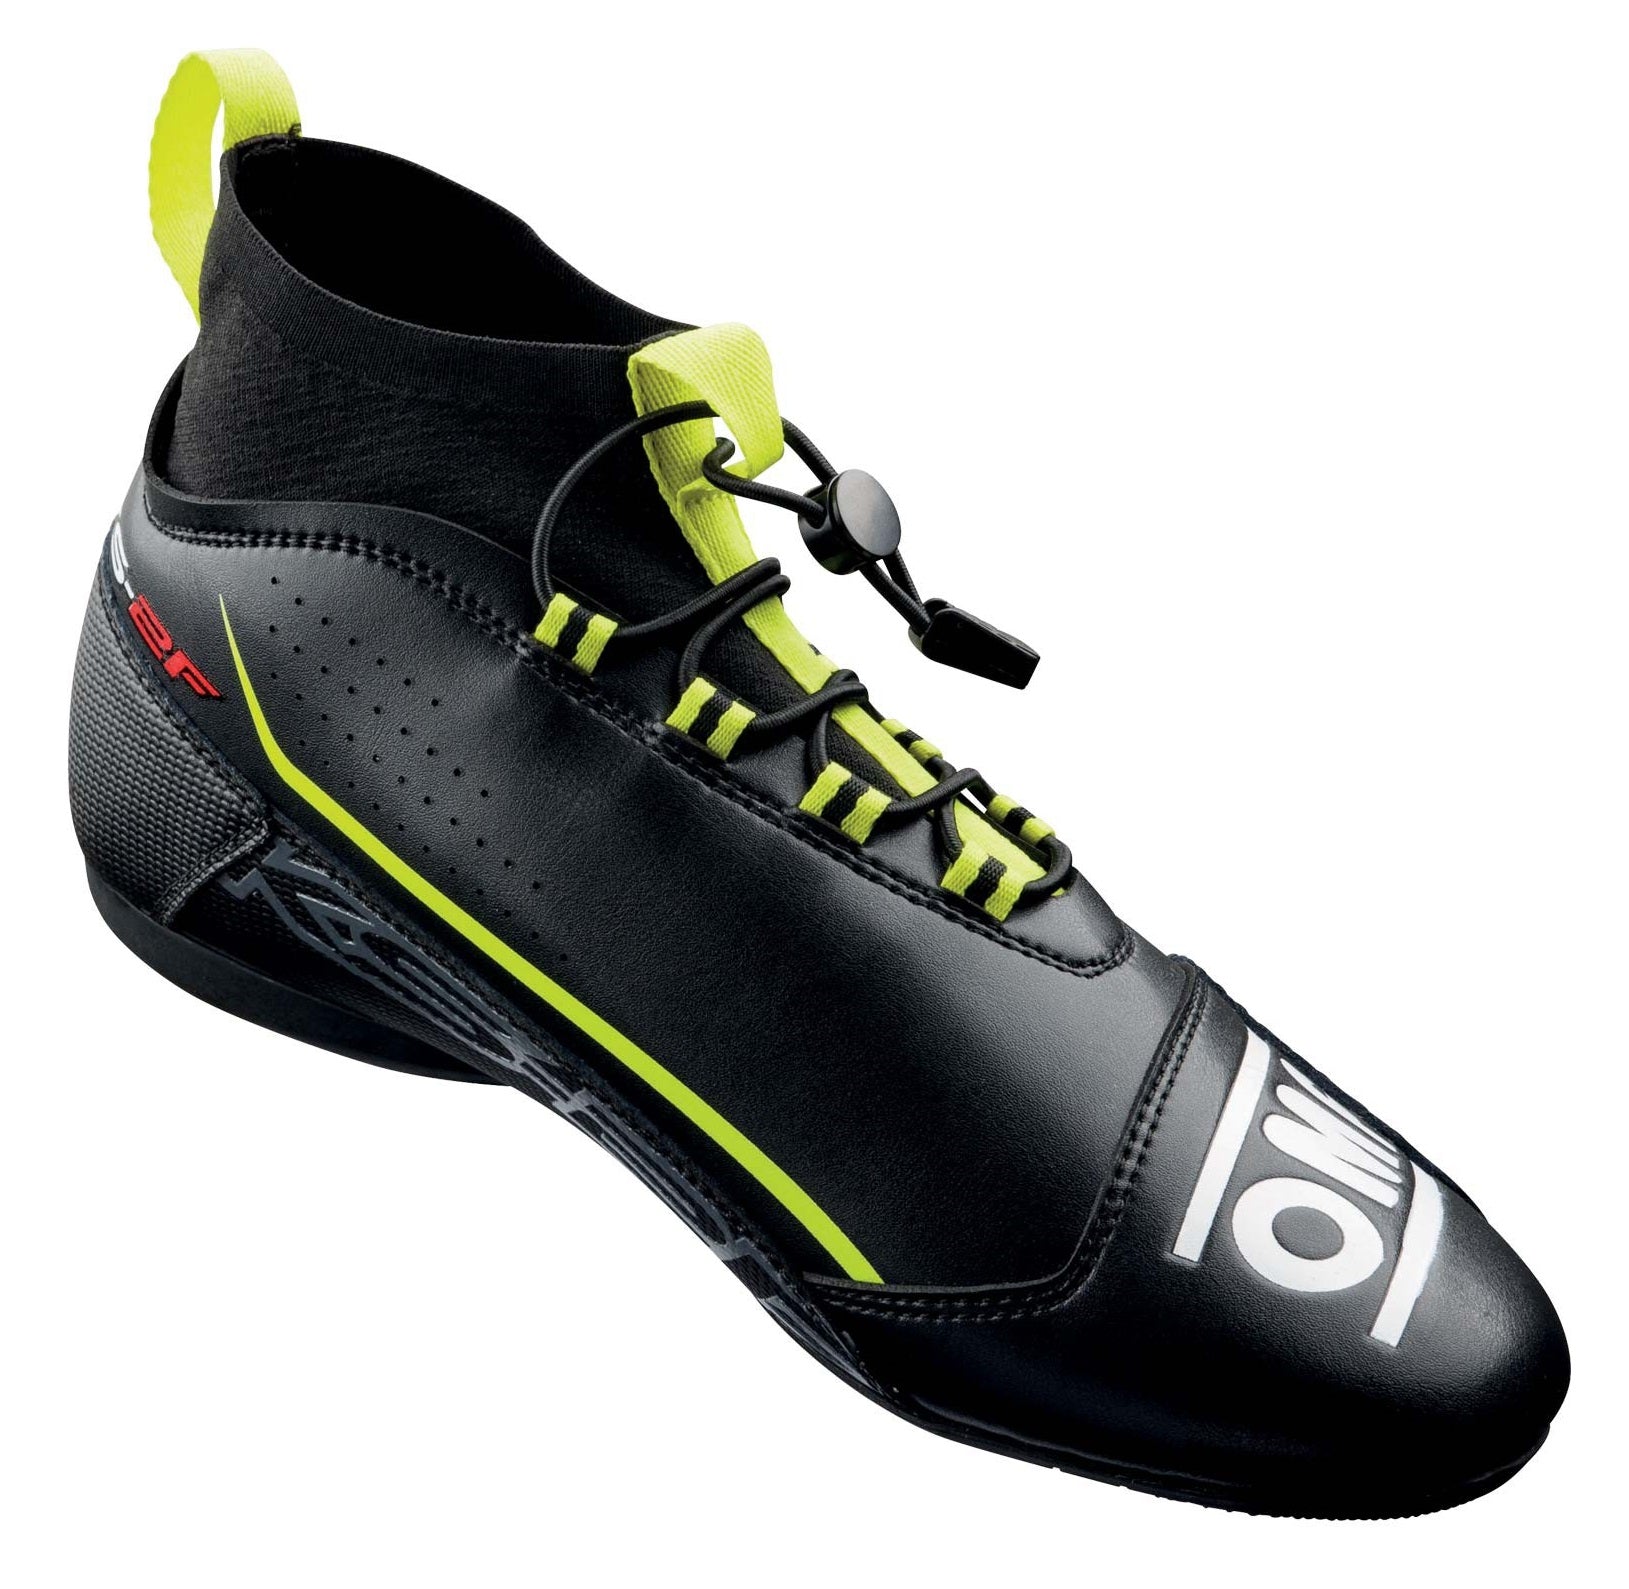 OMP KC0-0830-A01-178-36 KS-2F Karting shoes, black/fluo yellow, size 36 Photo-1 